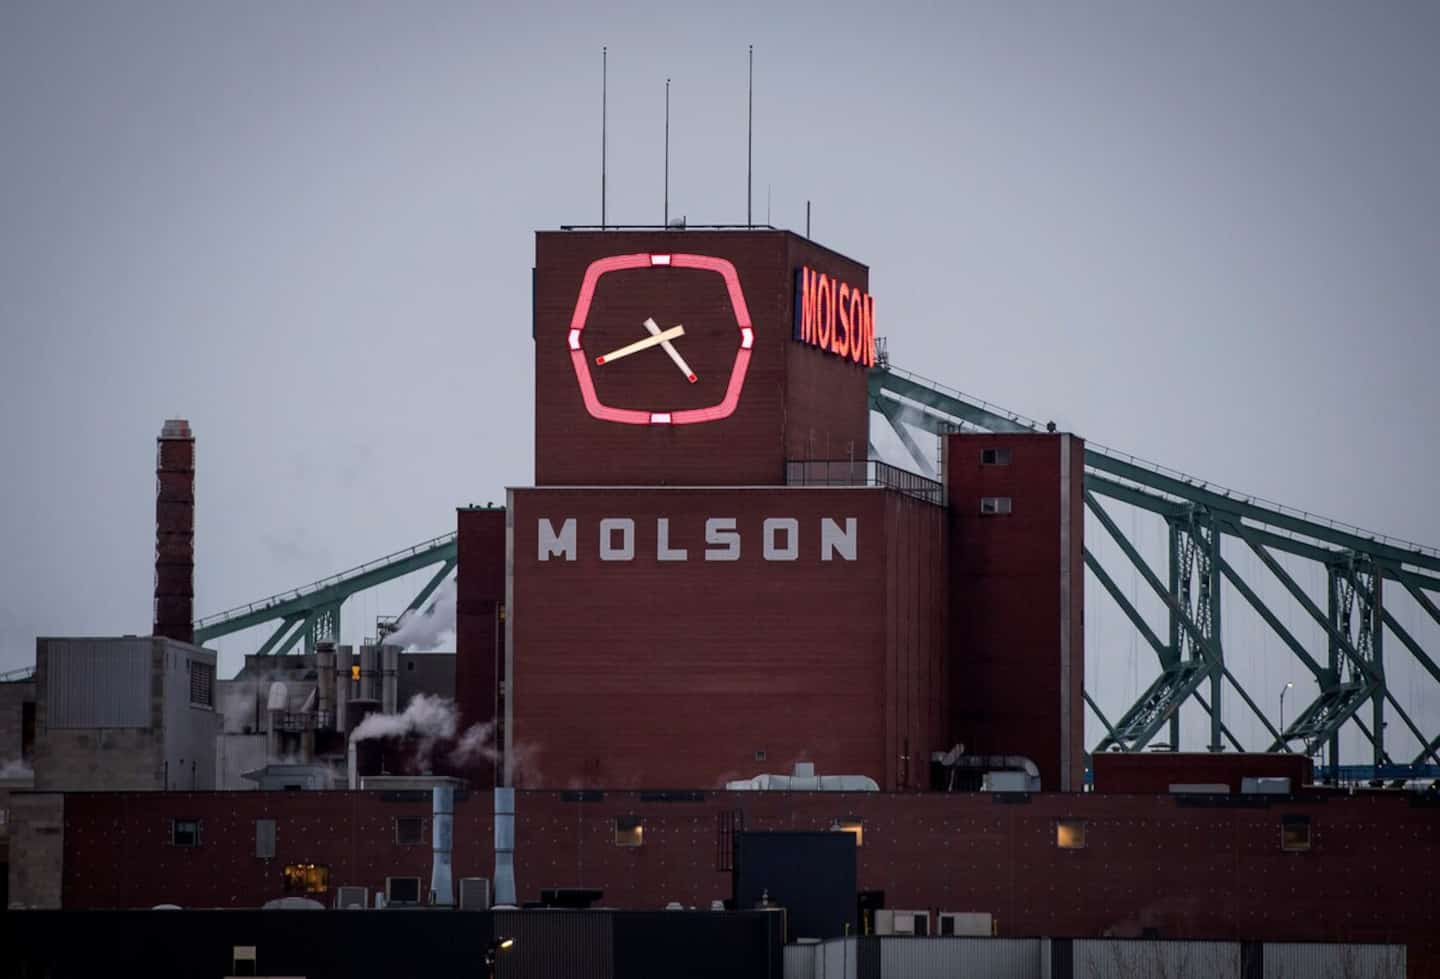 Another strike in sight at Molson Coors